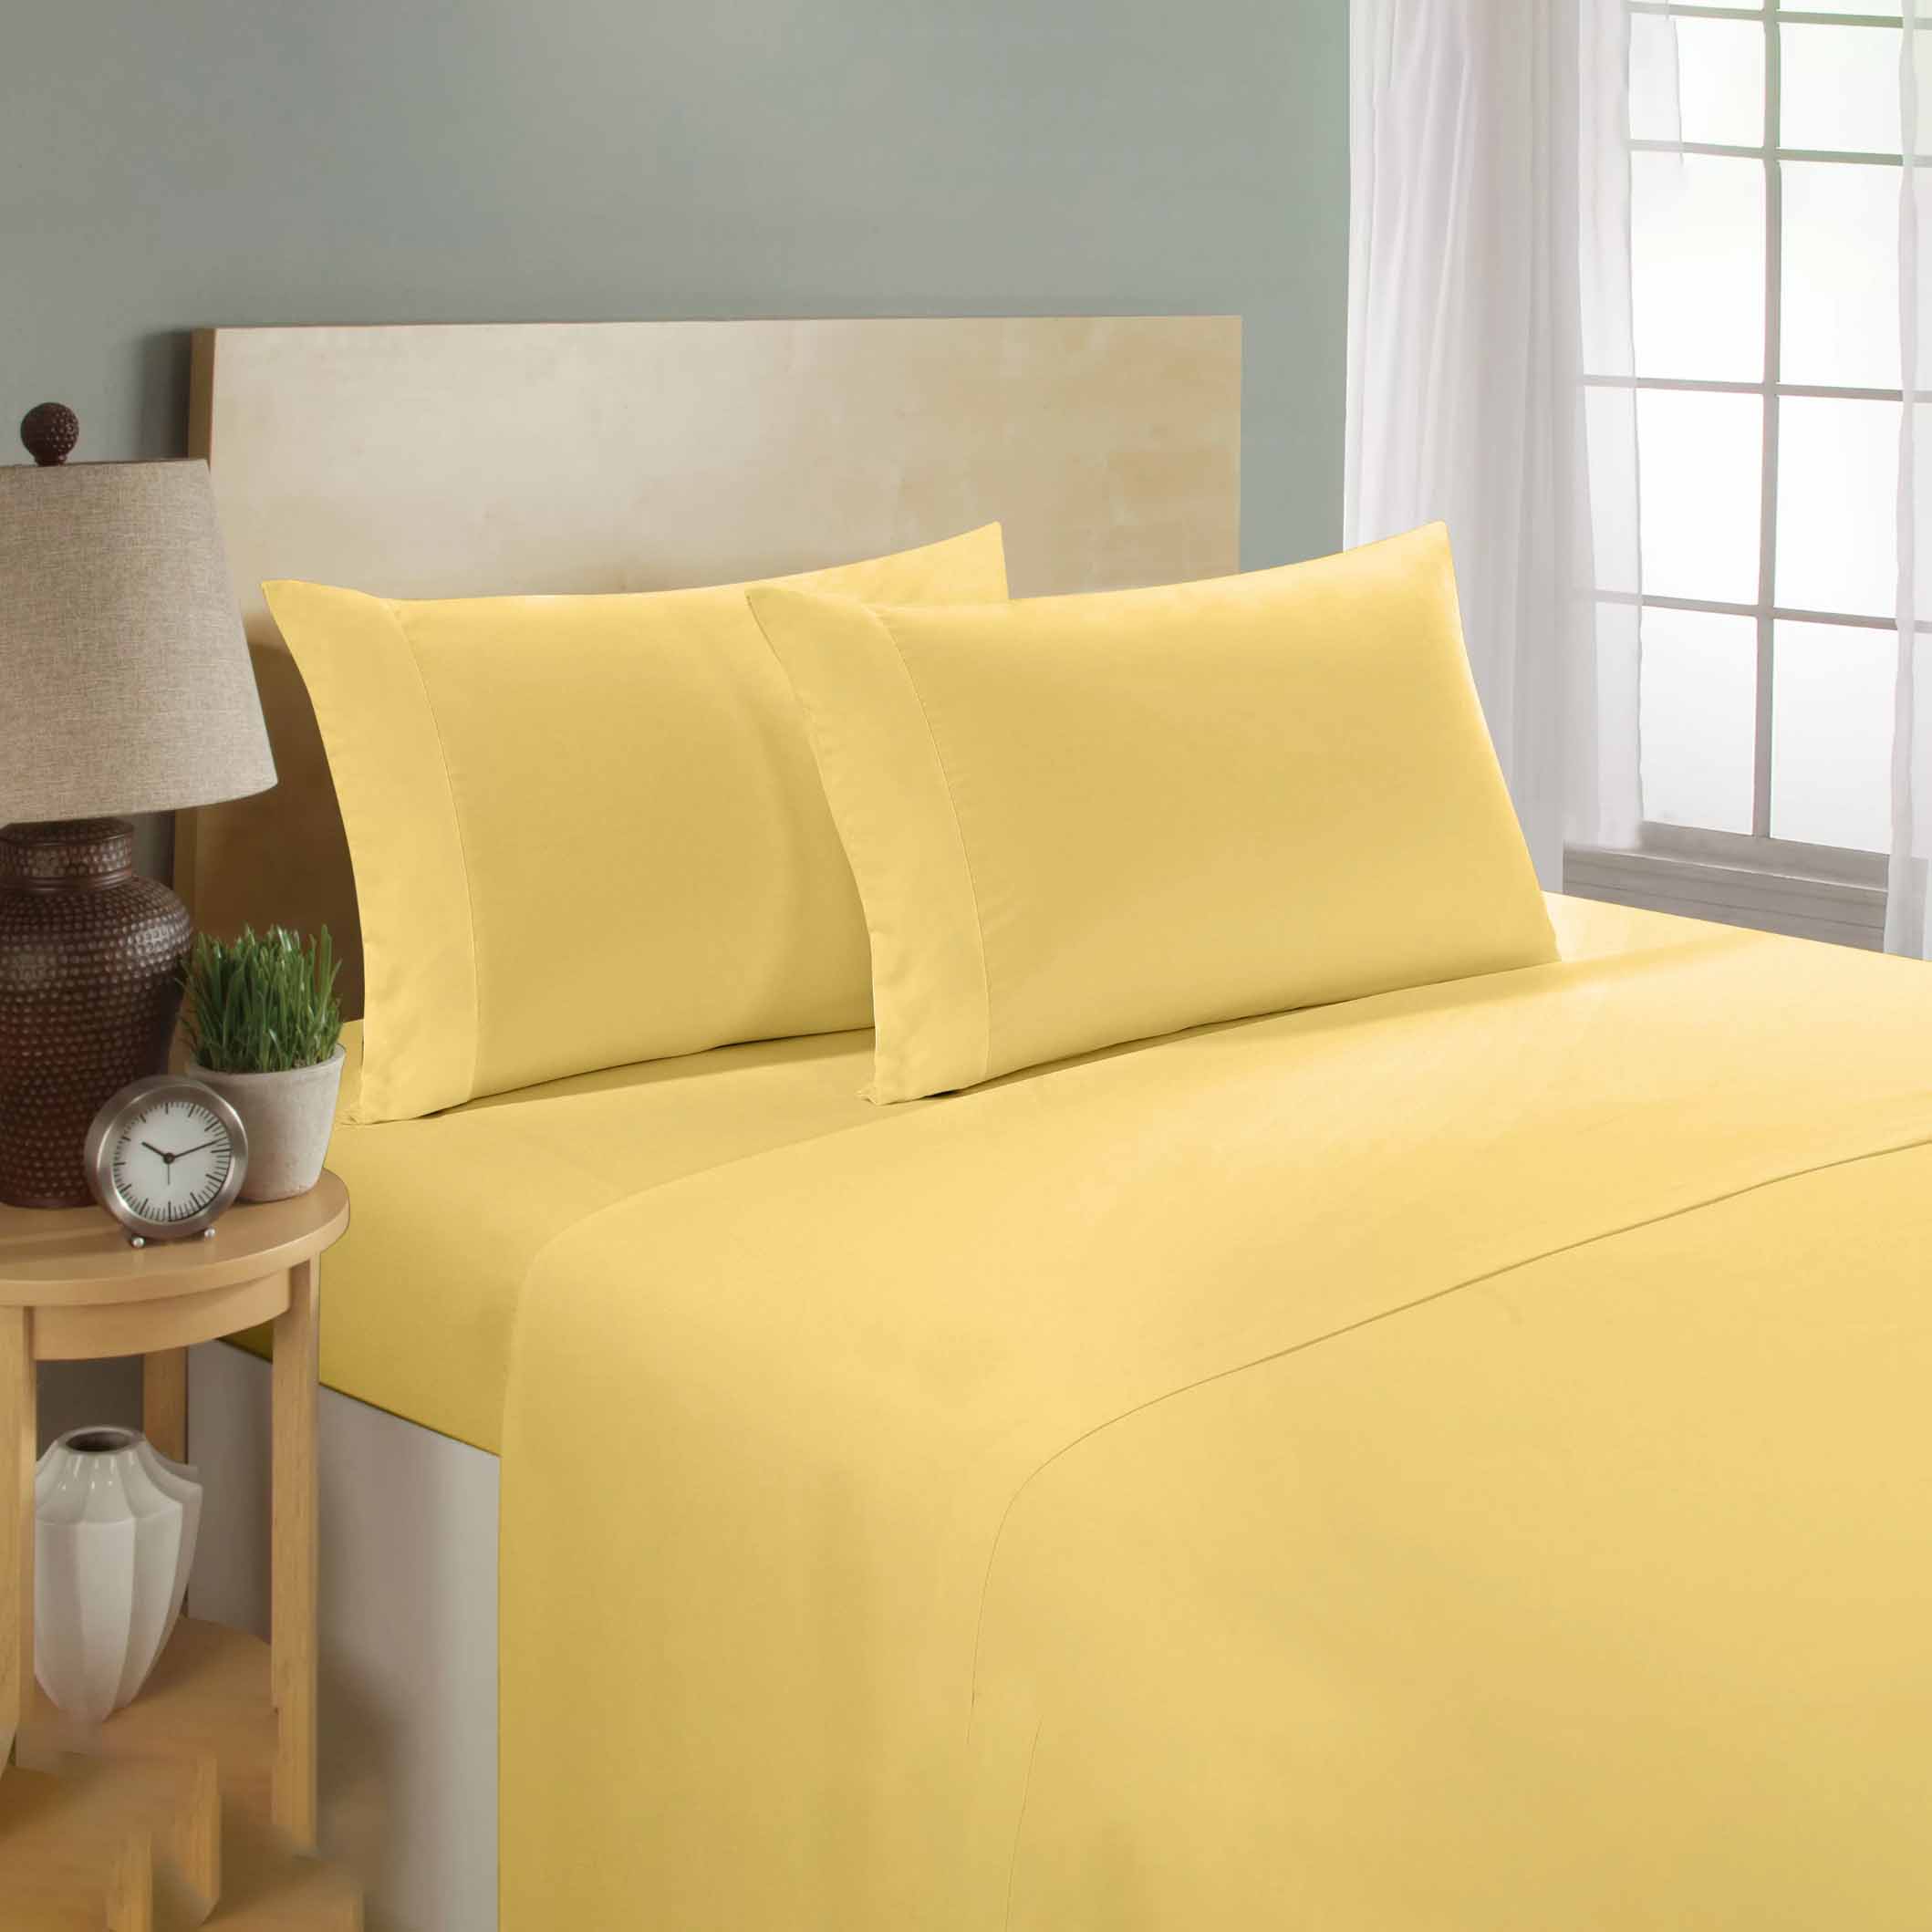 Egyptian bedsheets in yellow